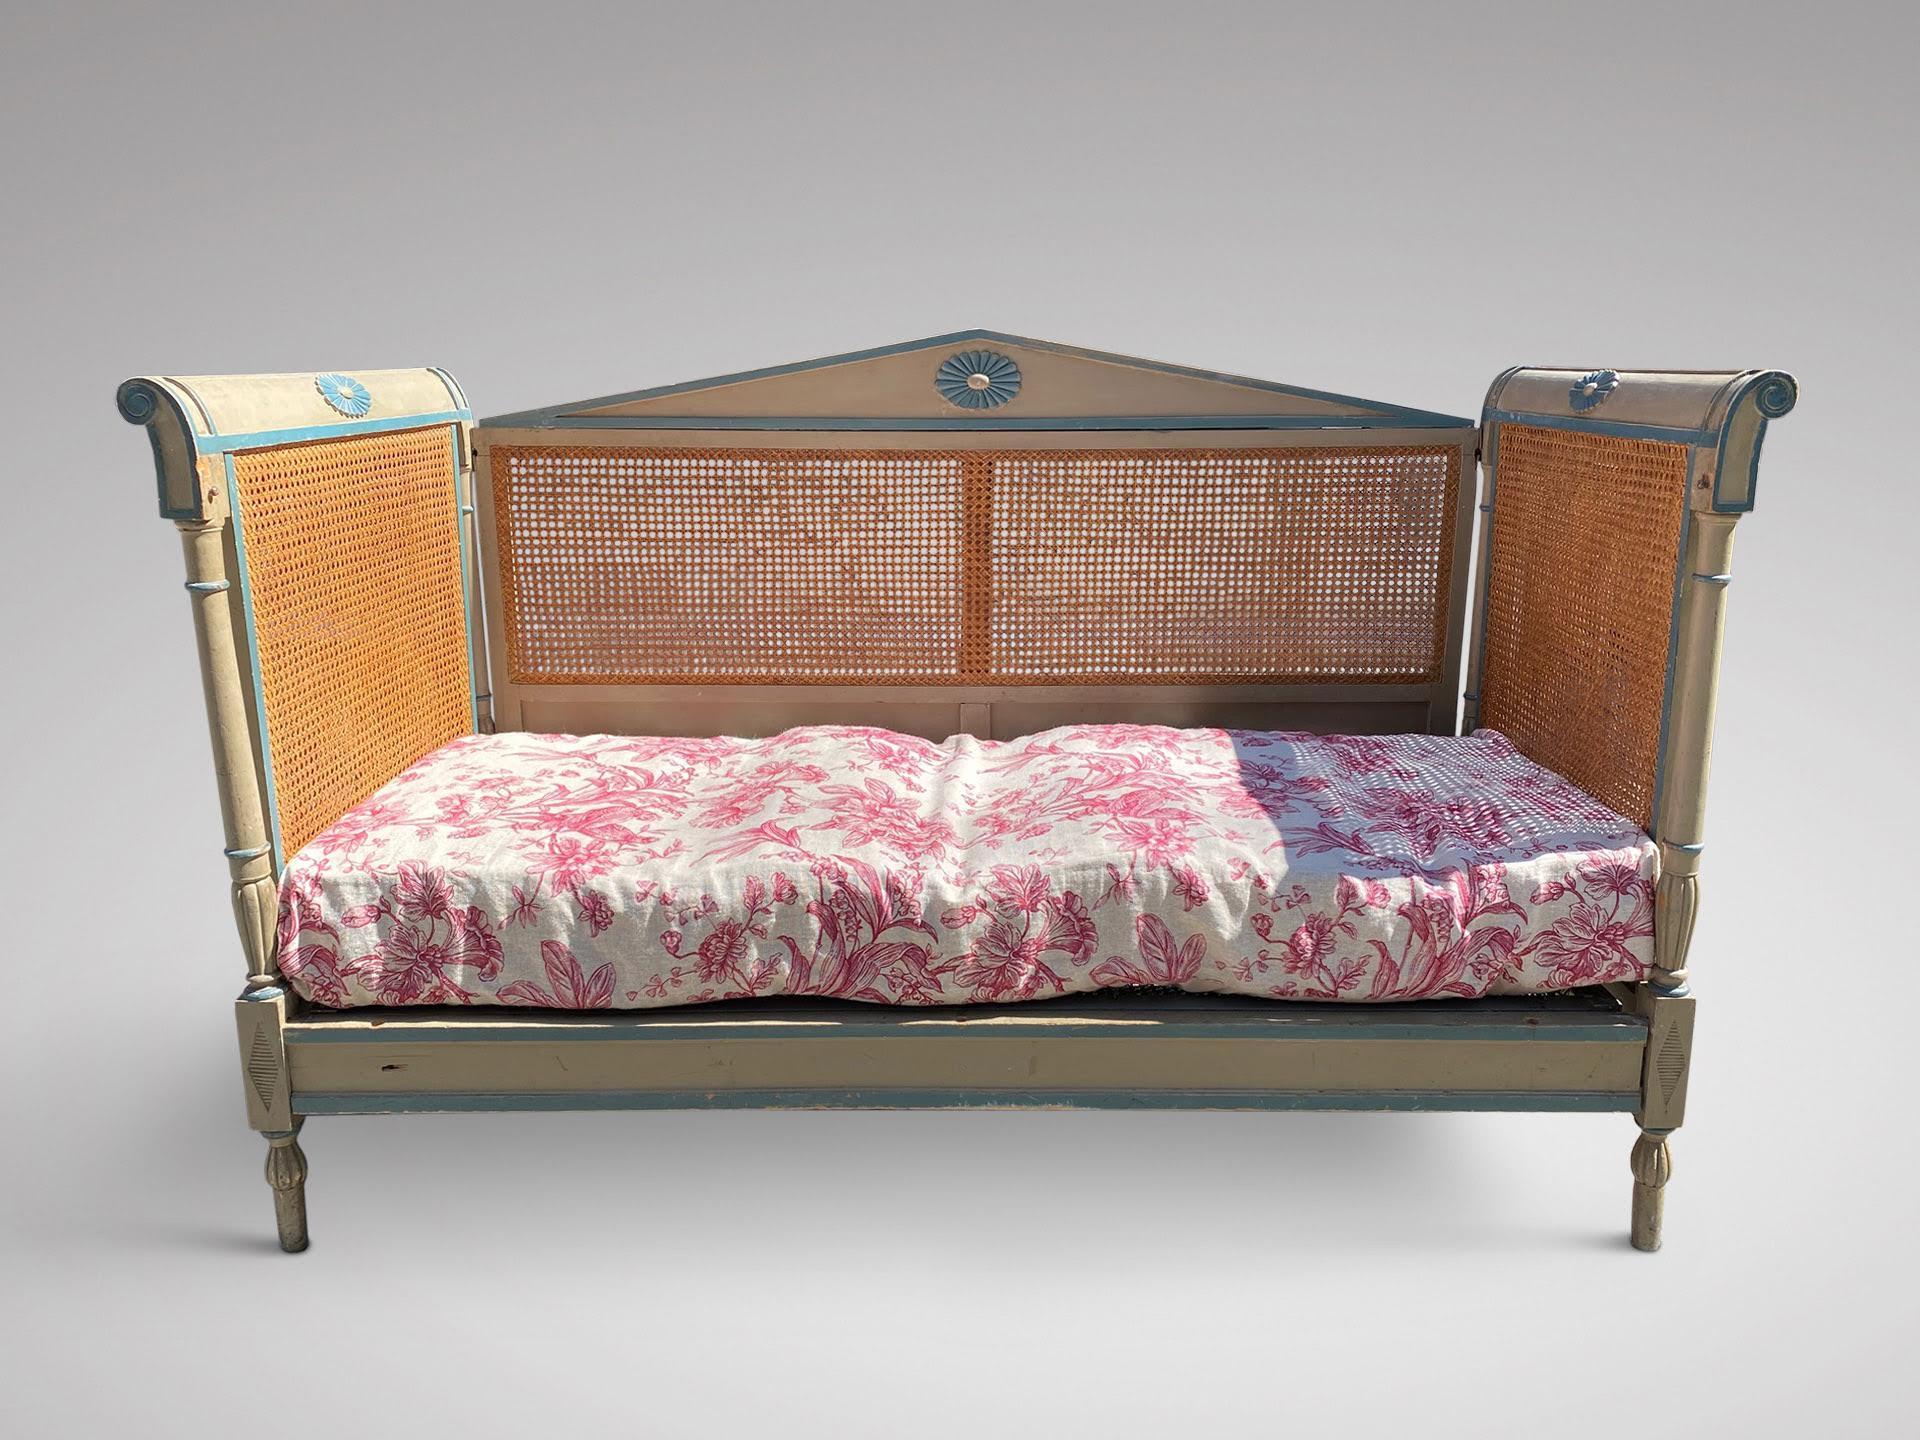 A late 19th century French Directoire daybed, the carved frame painted in green and blue and upholstered matress in toile de jouy. The metal base is supported on wooden batons which can be easily removed. All sides in original double cane work and